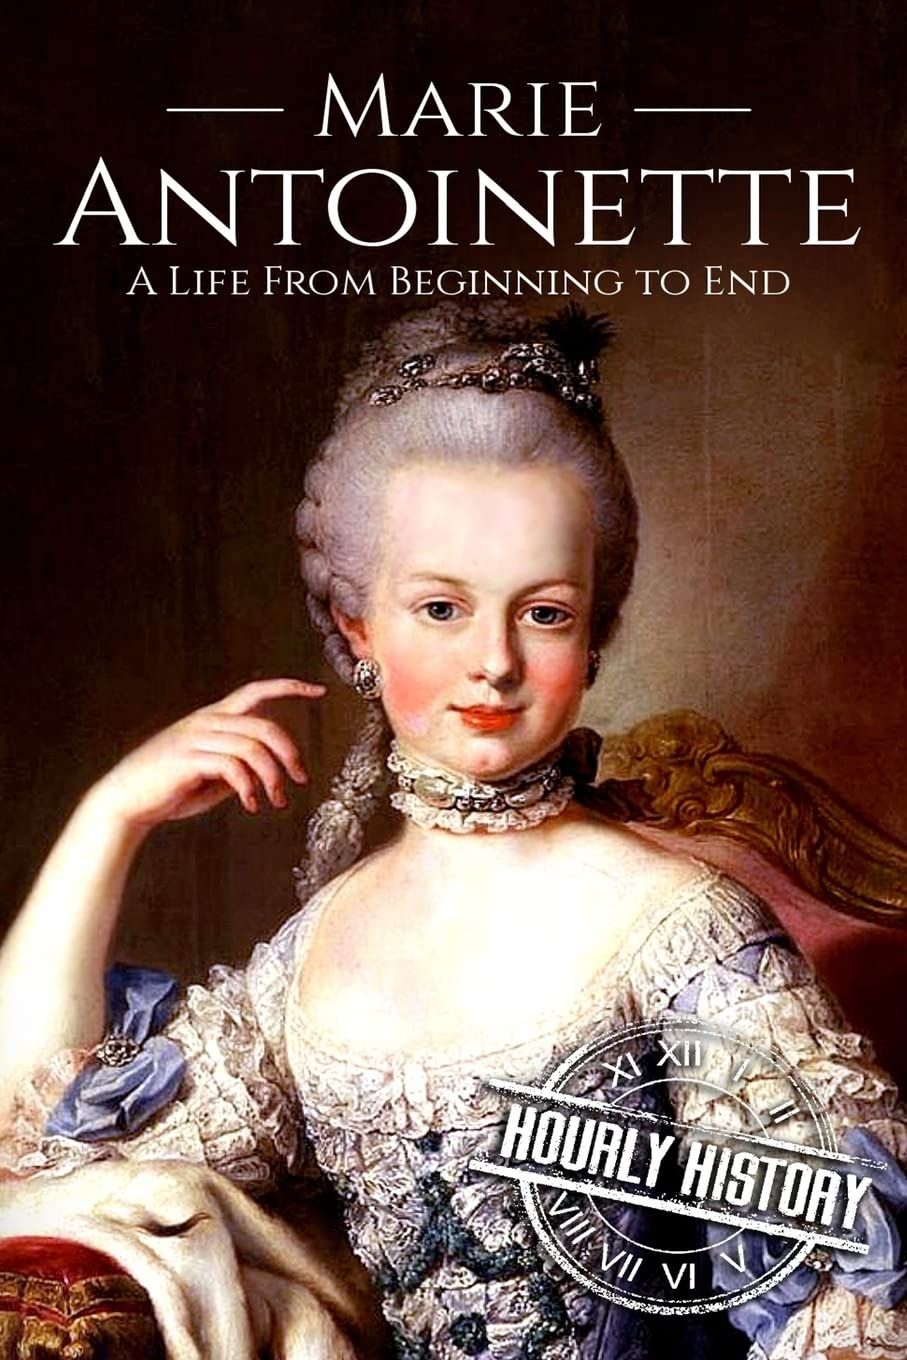 Marie Antoinette: A Life From Beginning to End